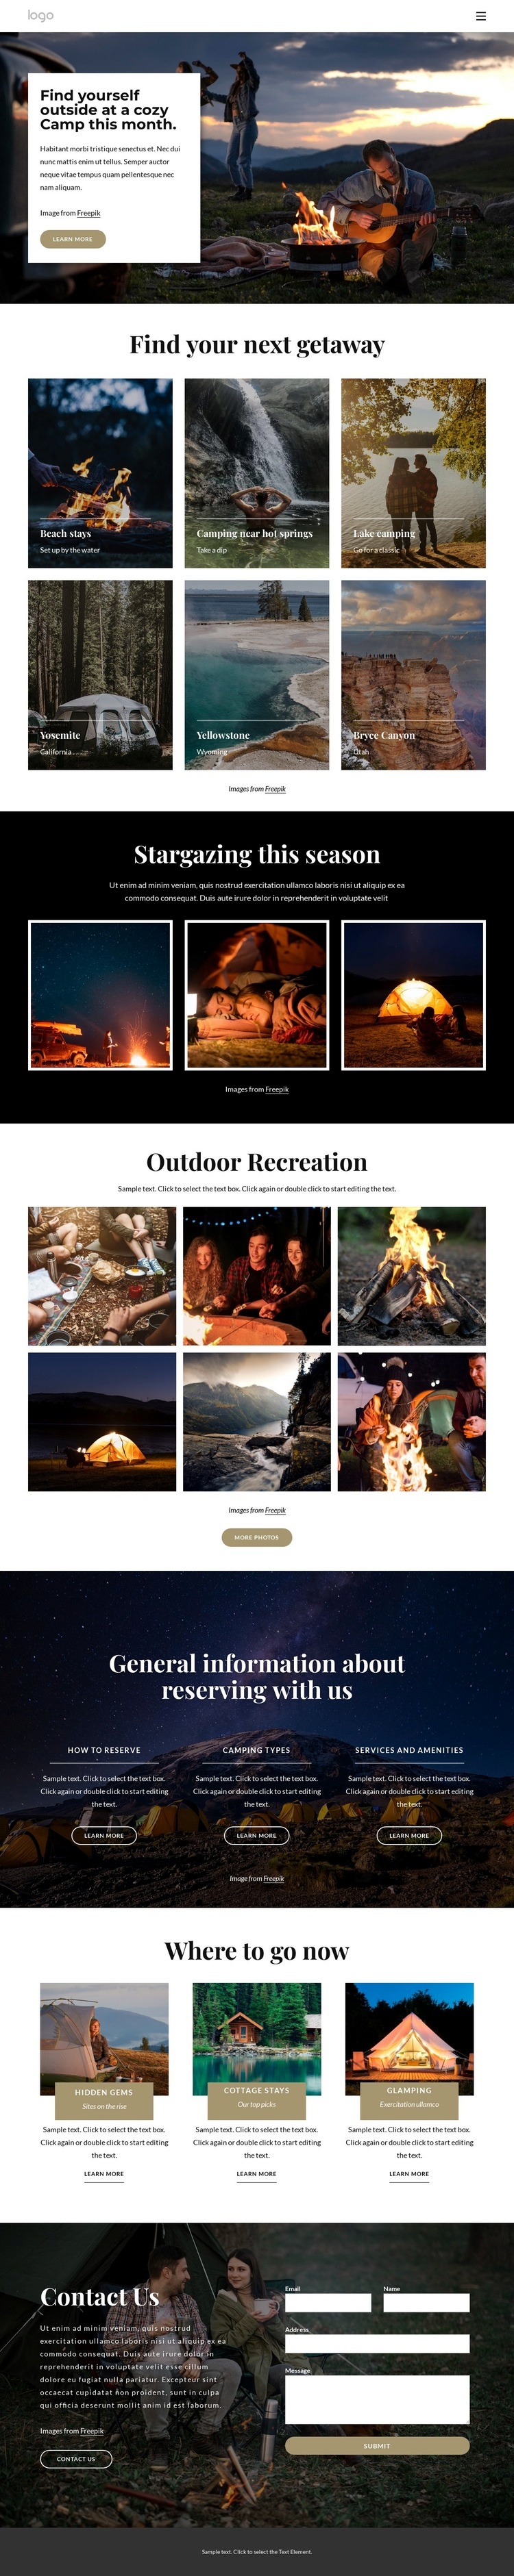 Going on a camping trip Html Code Example